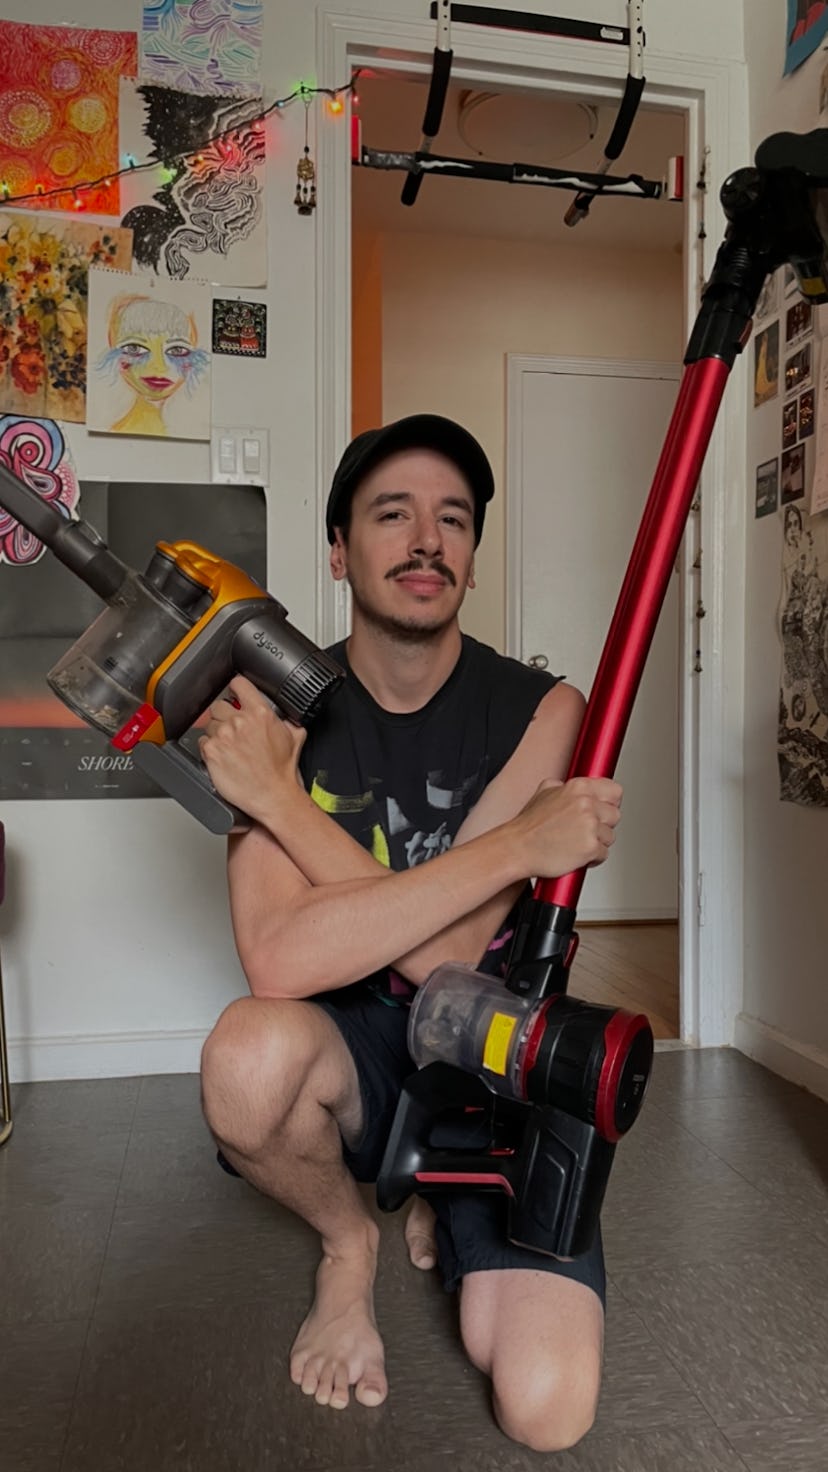 James Pero (the author) holding two vacuums